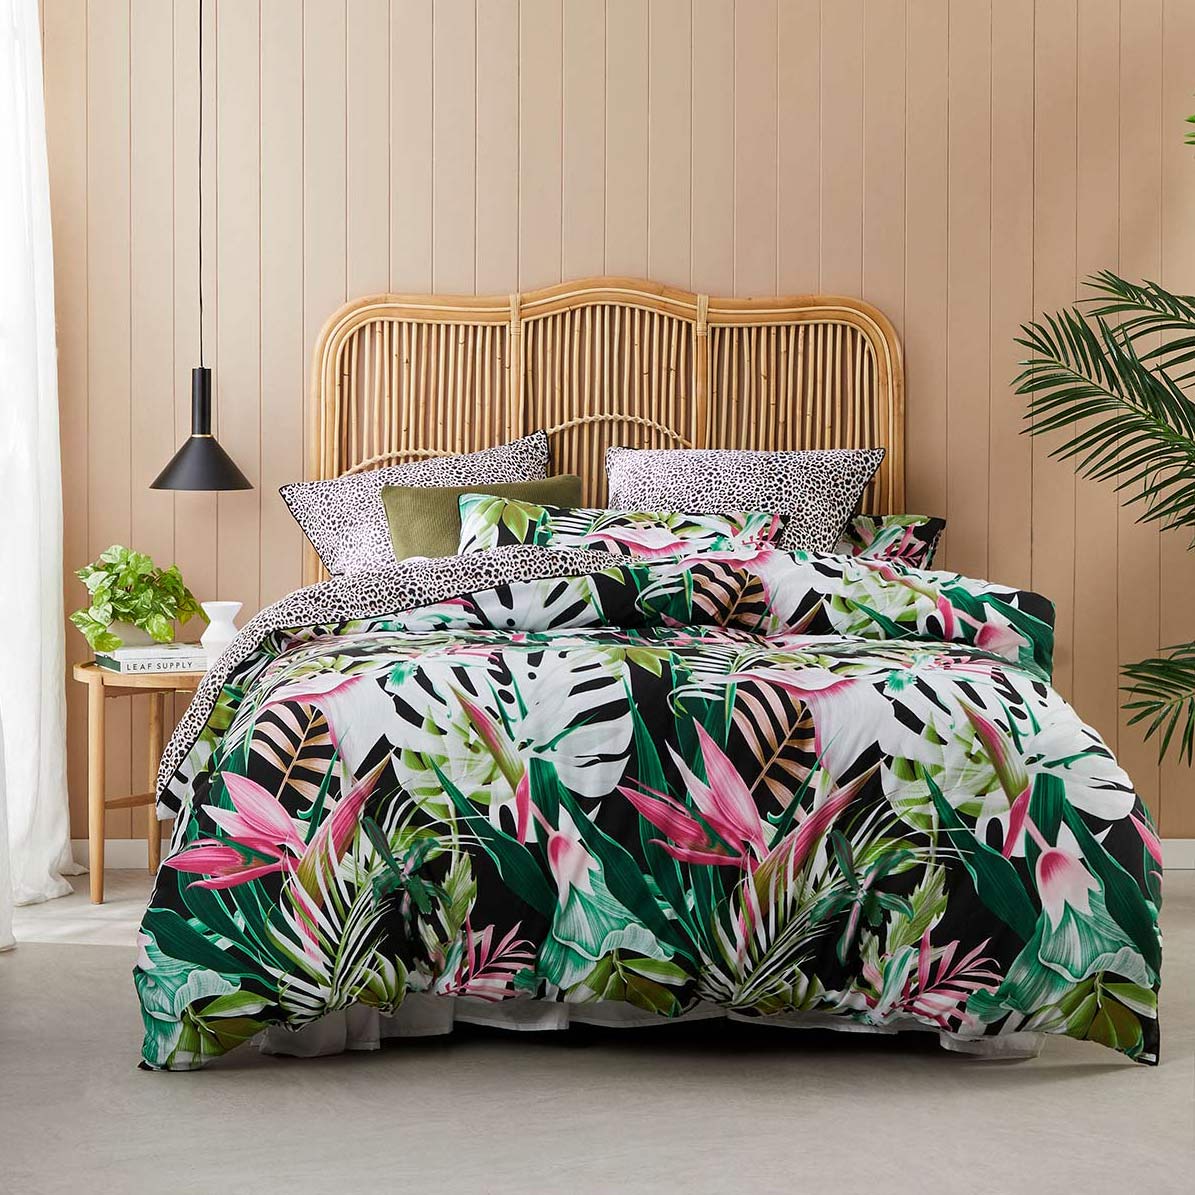 Akena Forest Quilt Cover Set by Logan & Mason | Quilt Cover World